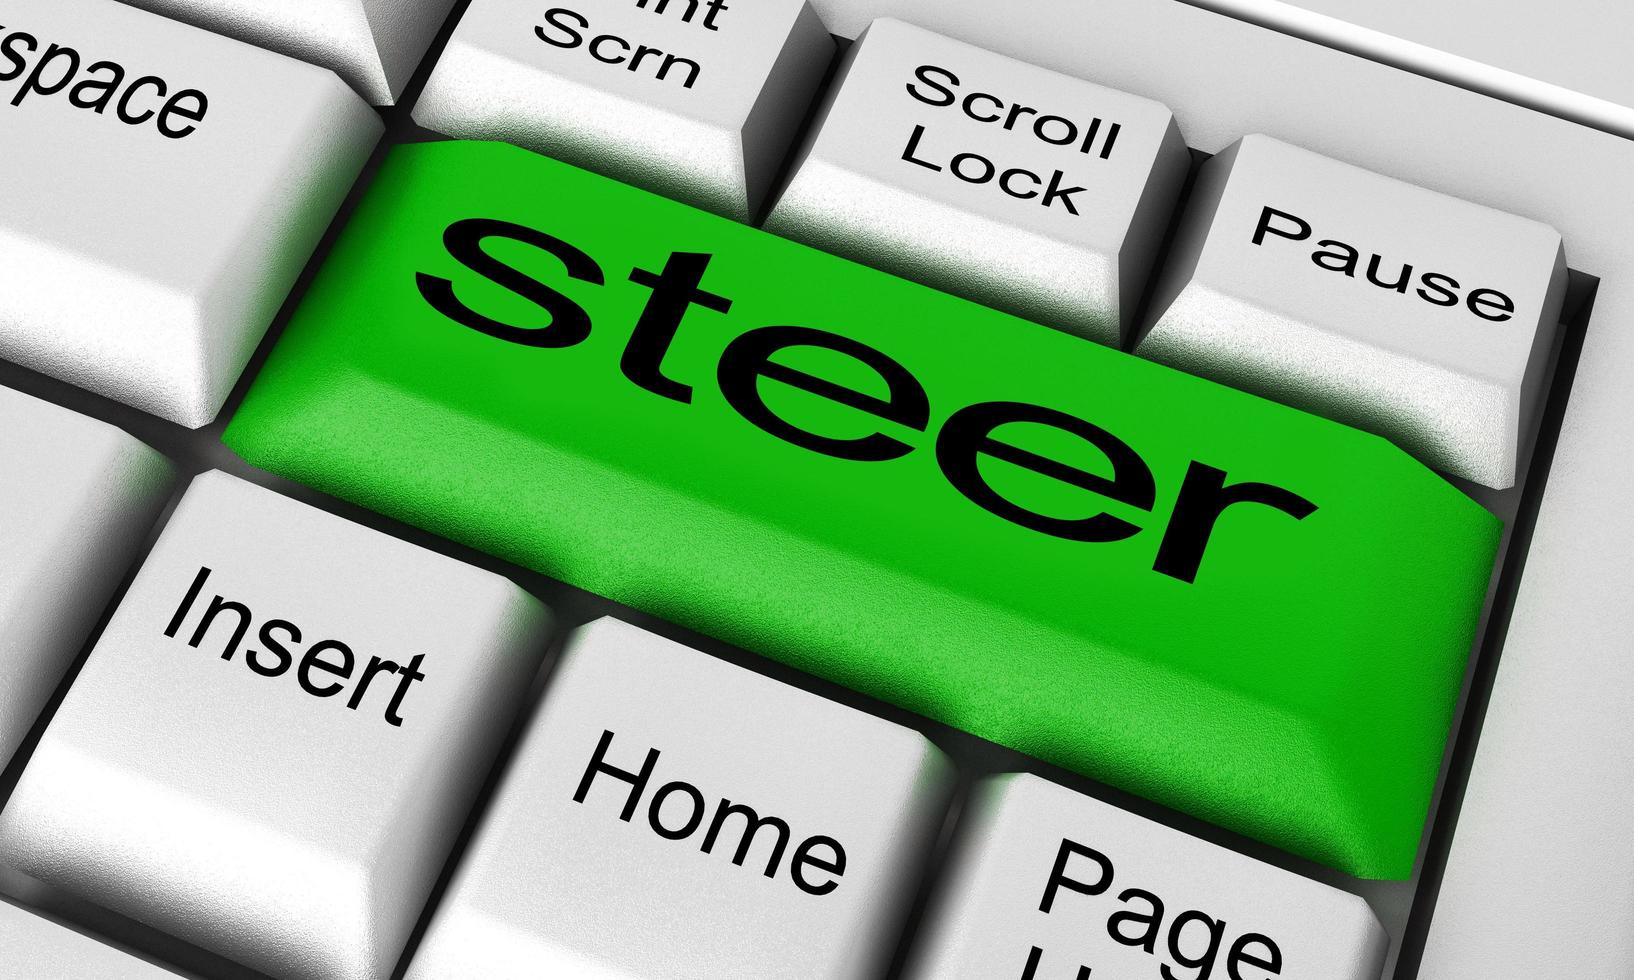 steer word on keyboard button photo